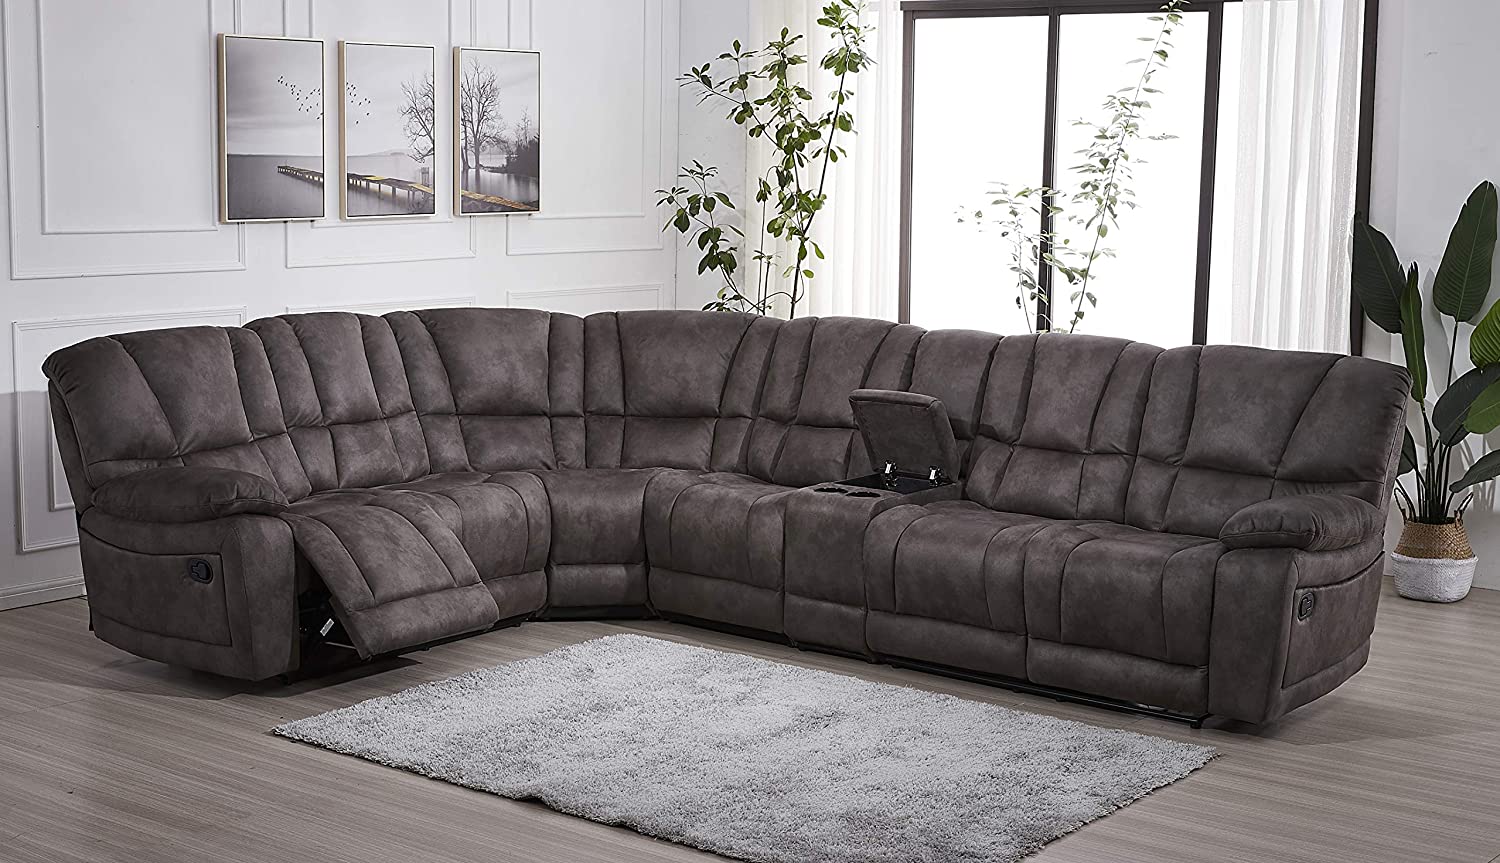 Betsy Furniture Reclining Sectional Living Room Sofa Set